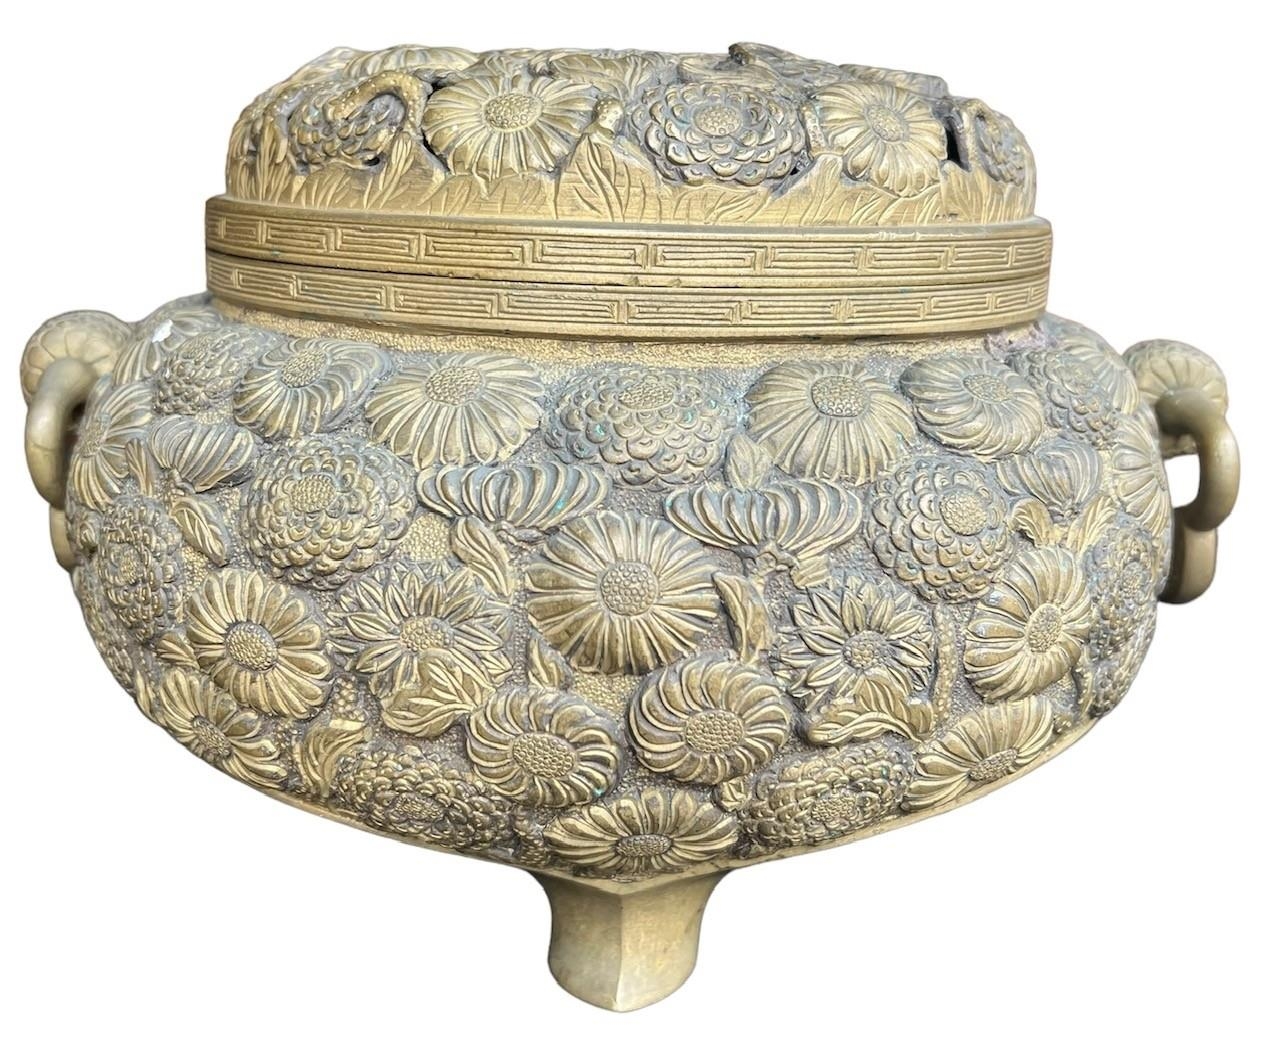 A LARGE JAPANESE MEIJI PERIOD BRONZE KORO AND COVER Decorated with sixteenth petal chrysanthemum - Image 4 of 8